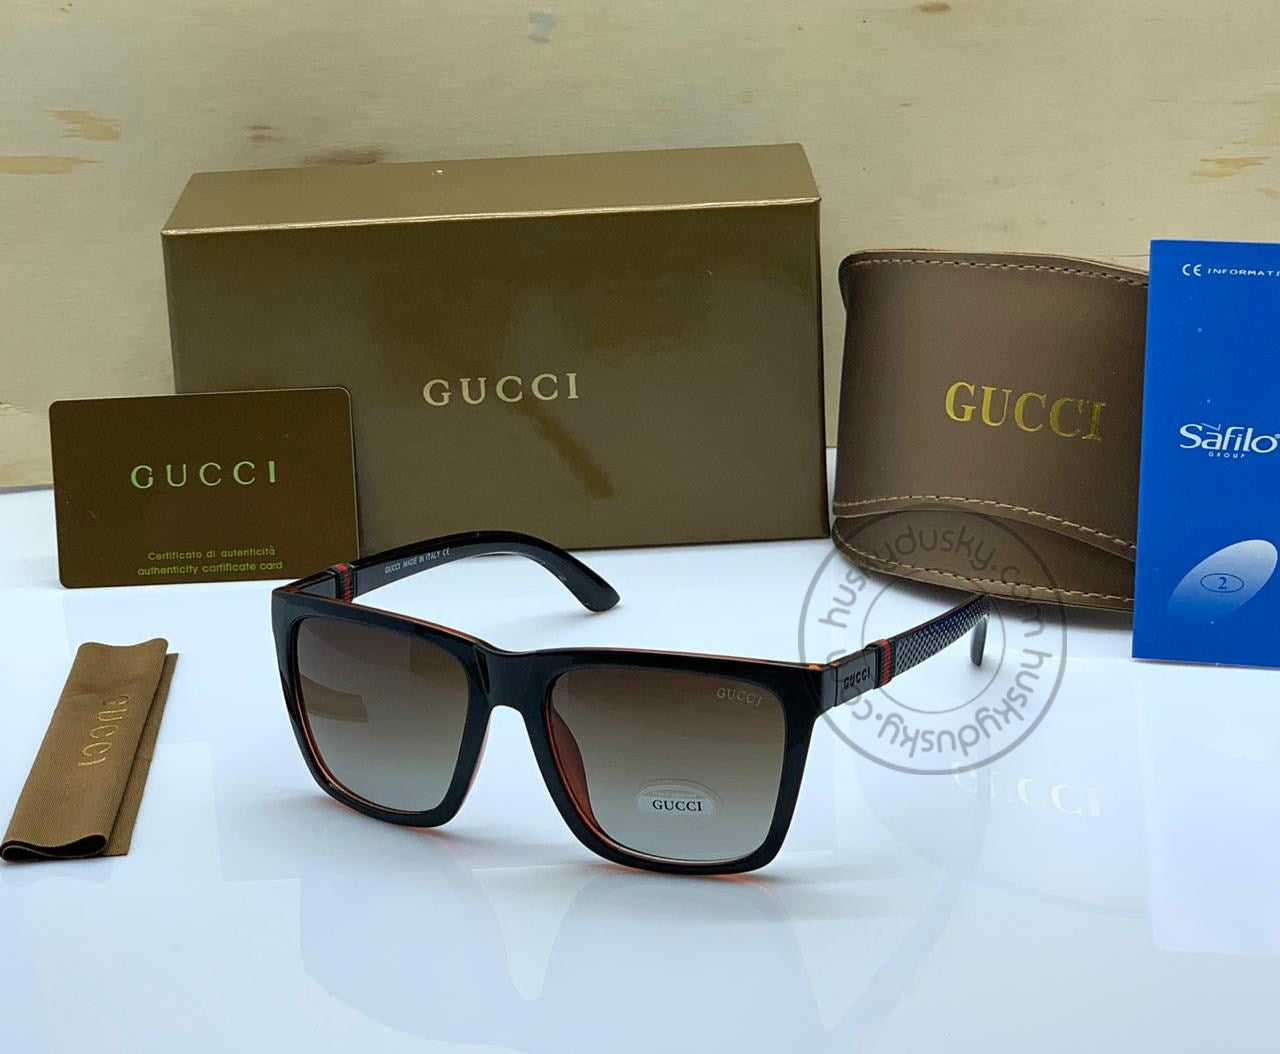 Gucci Branded Brown Color Shade Glass Men's Women's Sunglass for Man Woman or Girl GU-301 Black Stick Gift Sunglass